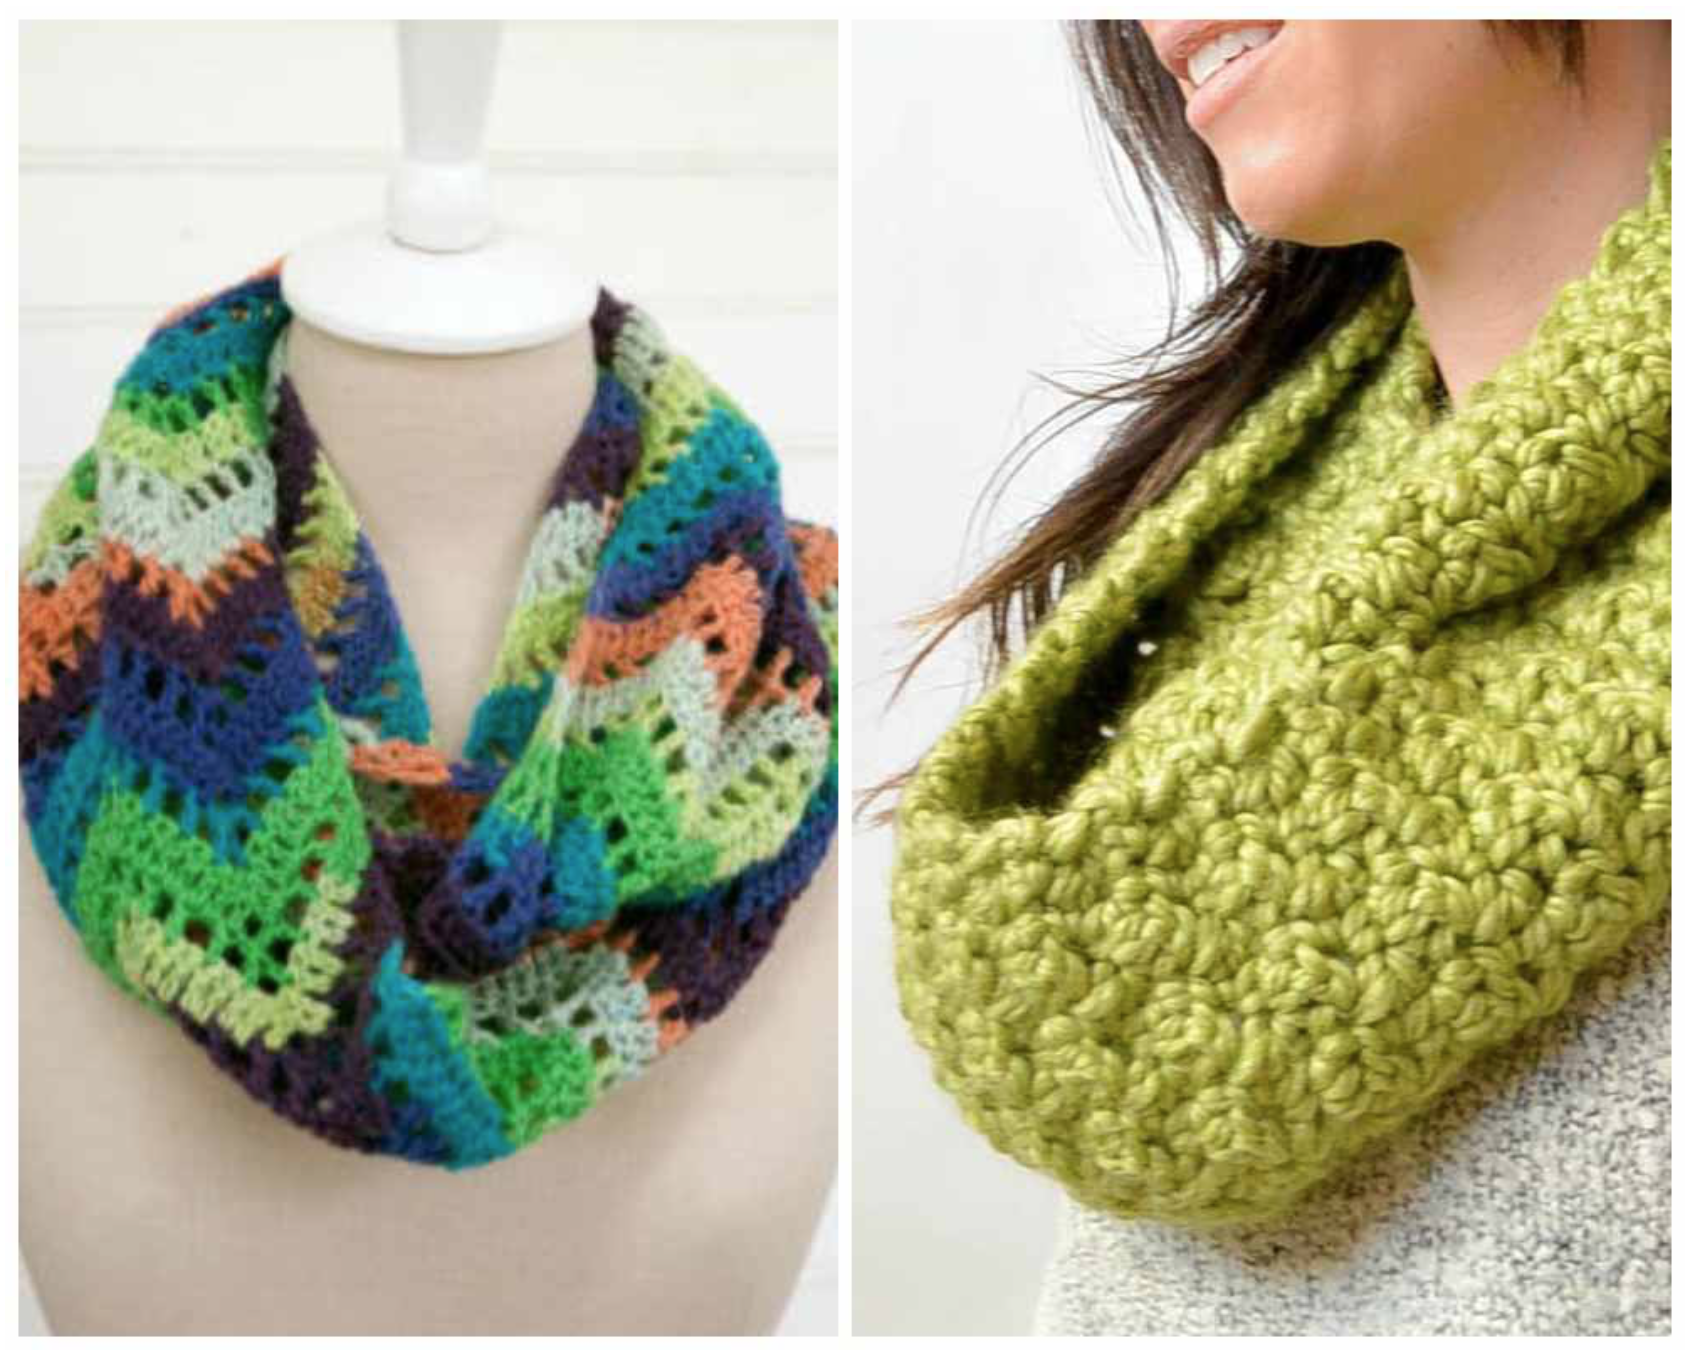 Easy Crochet Hooded Cowl - A Crocheted Simplicity